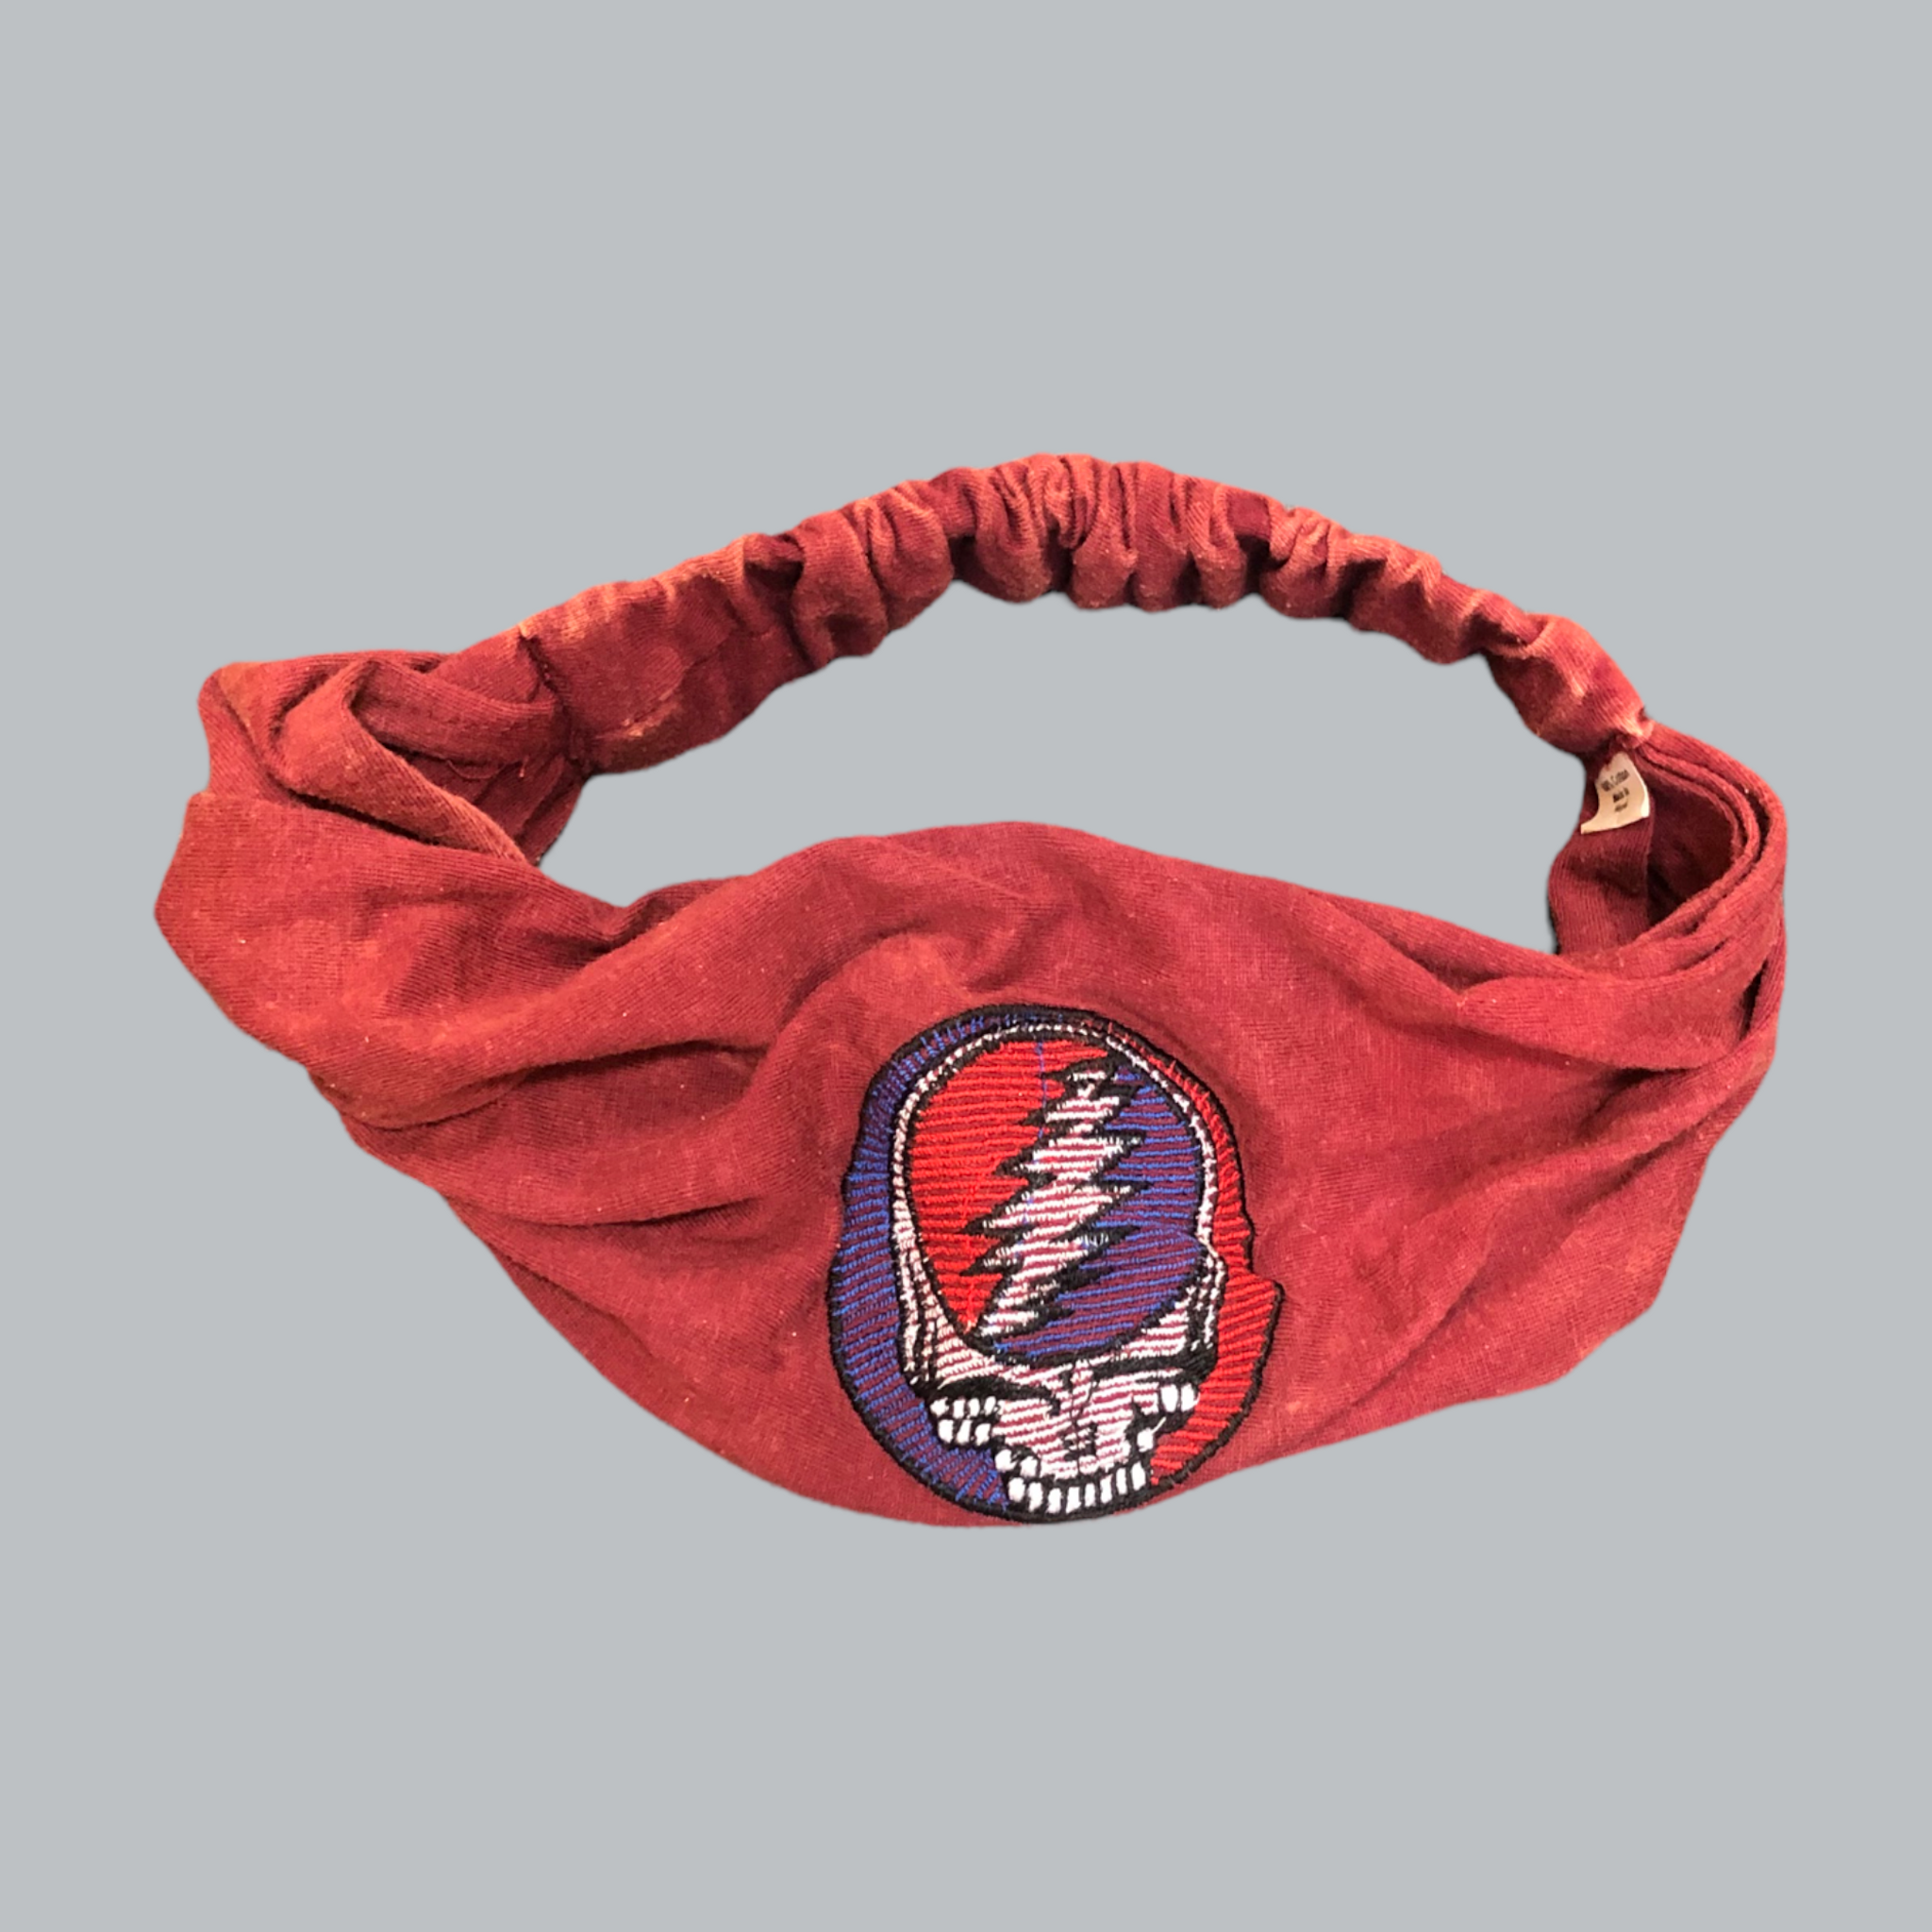 Grateful Dead Cotton Stonewash Headband With SYF Embroidery - Sold Singly